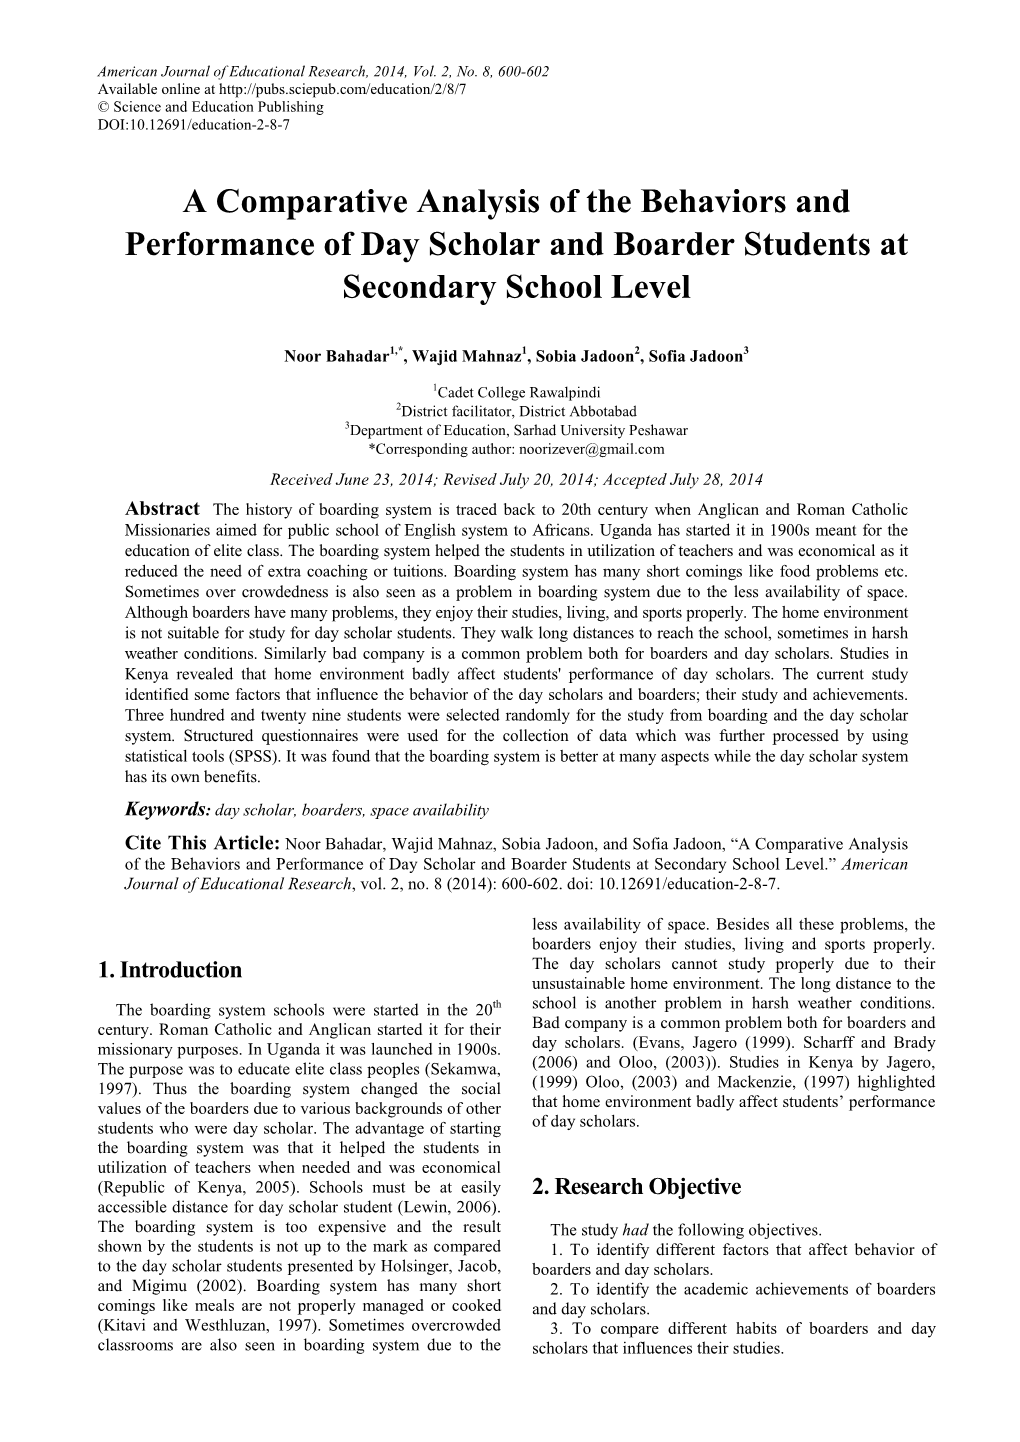 A Comparative Analysis of the Behaviors and Performance of Day Scholar and Boarder Students at Secondary School Level